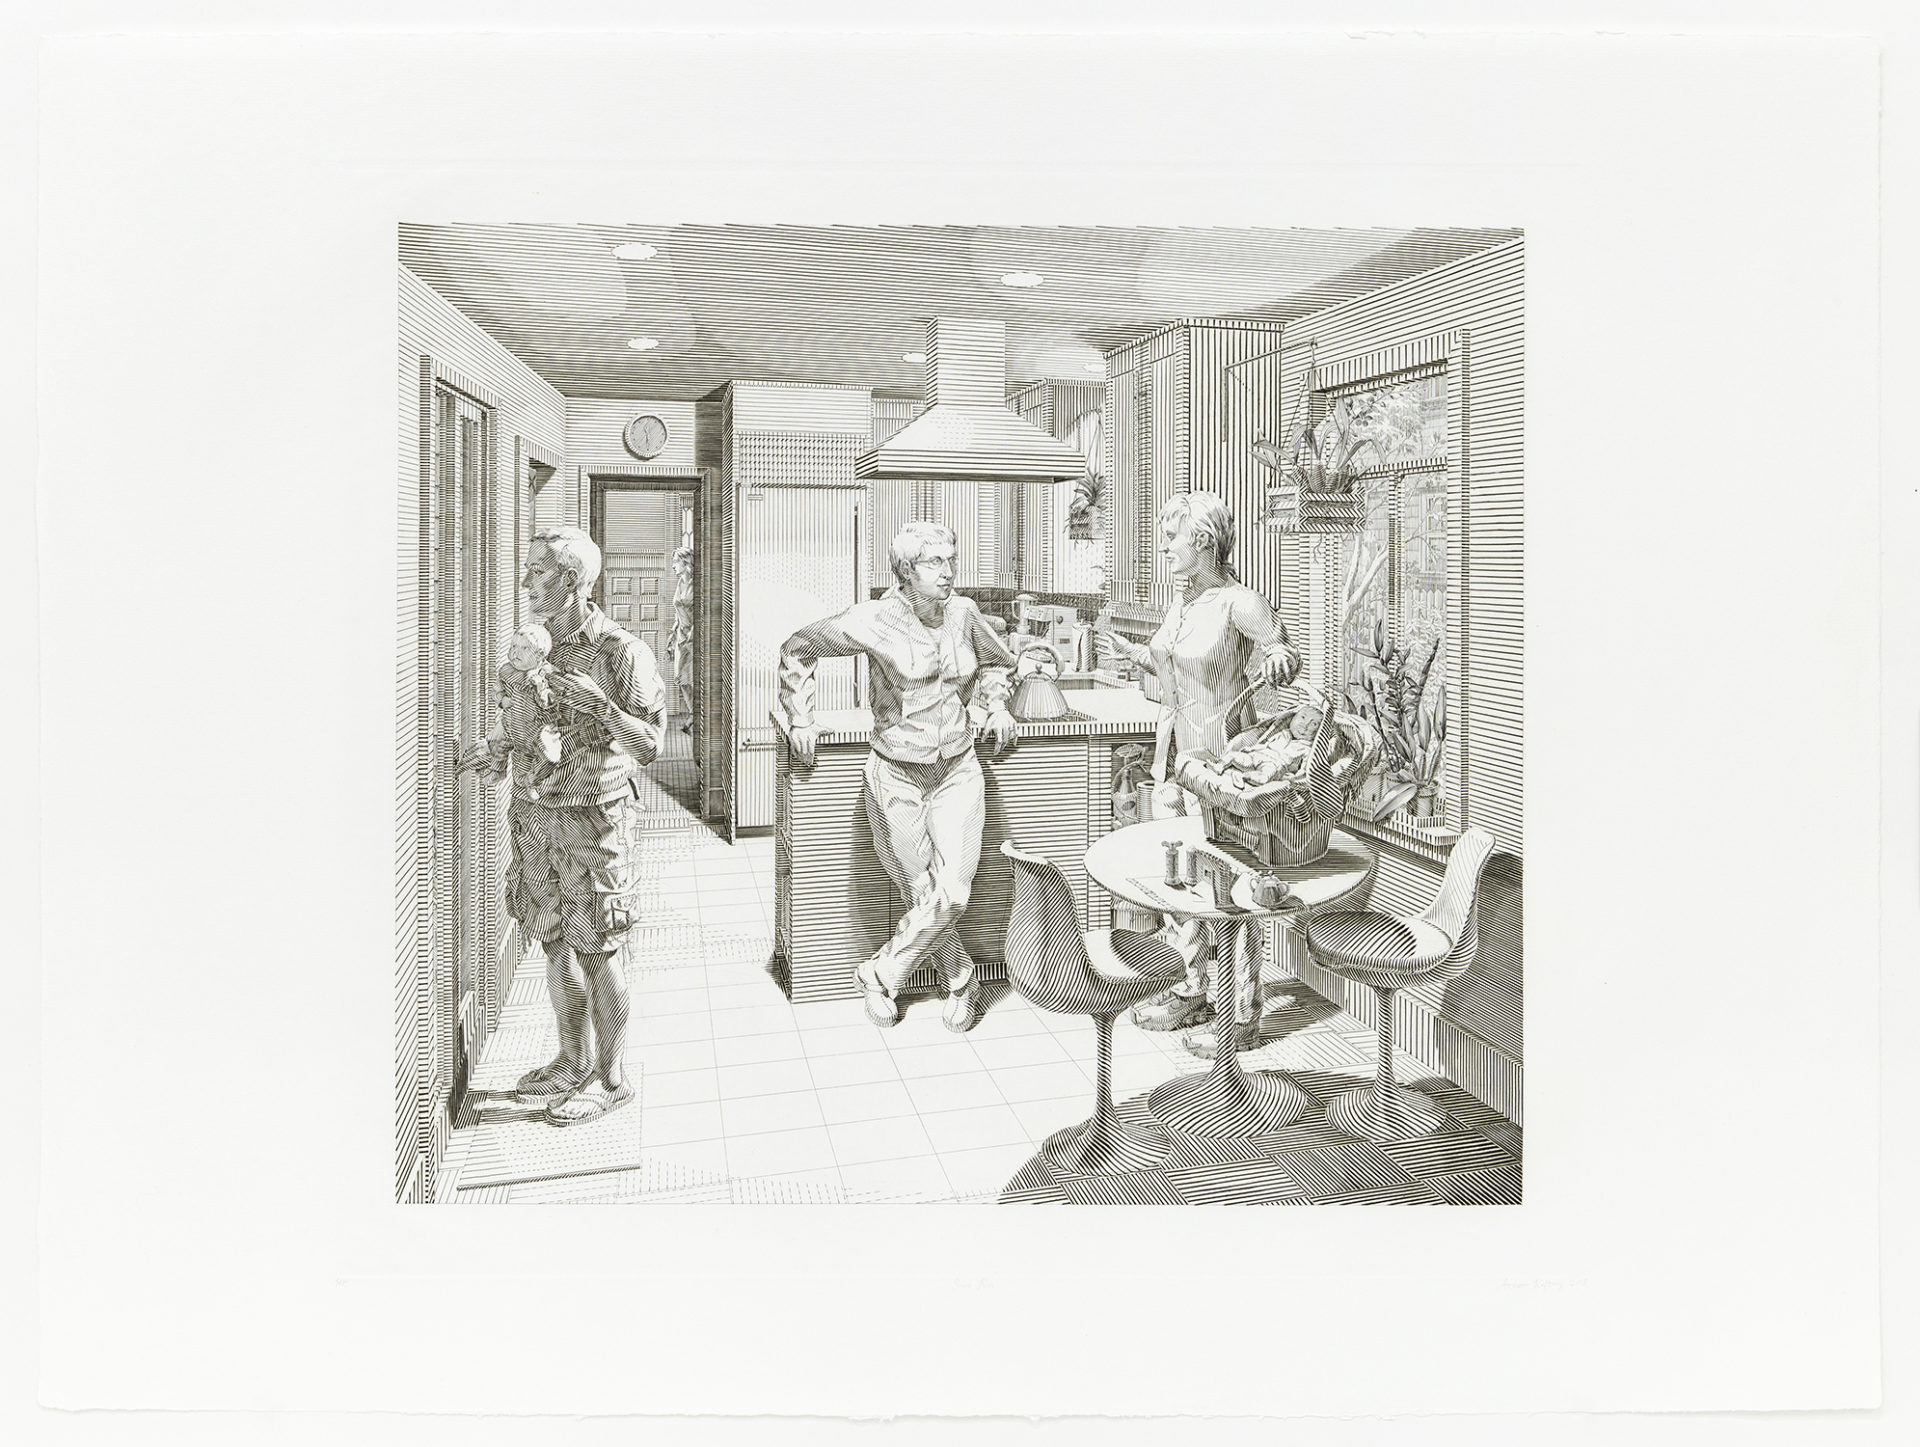 Open House: Five Engraved Scenes - Scene Three - Kitchen, 2008, Copperplate engraving, 22 x 30 inches (55.9 x 76.2 cm), Edition of 50